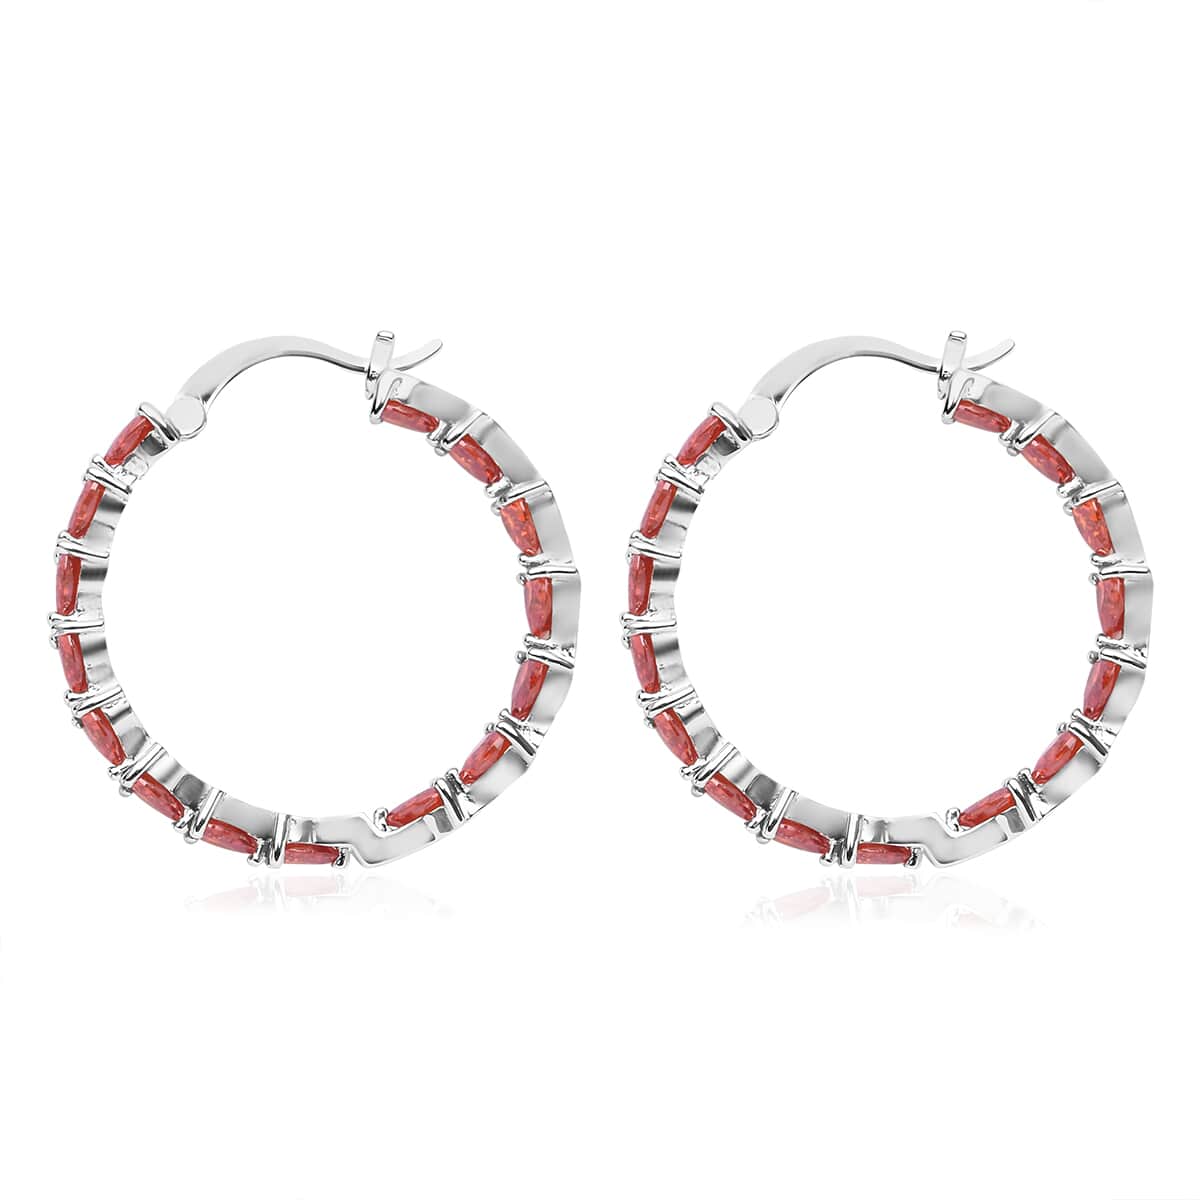 Simulated Orange Diamond Earrings in Silvertone, Inside Out Hoops, Simulated Diamond Jewelry For Women image number 3